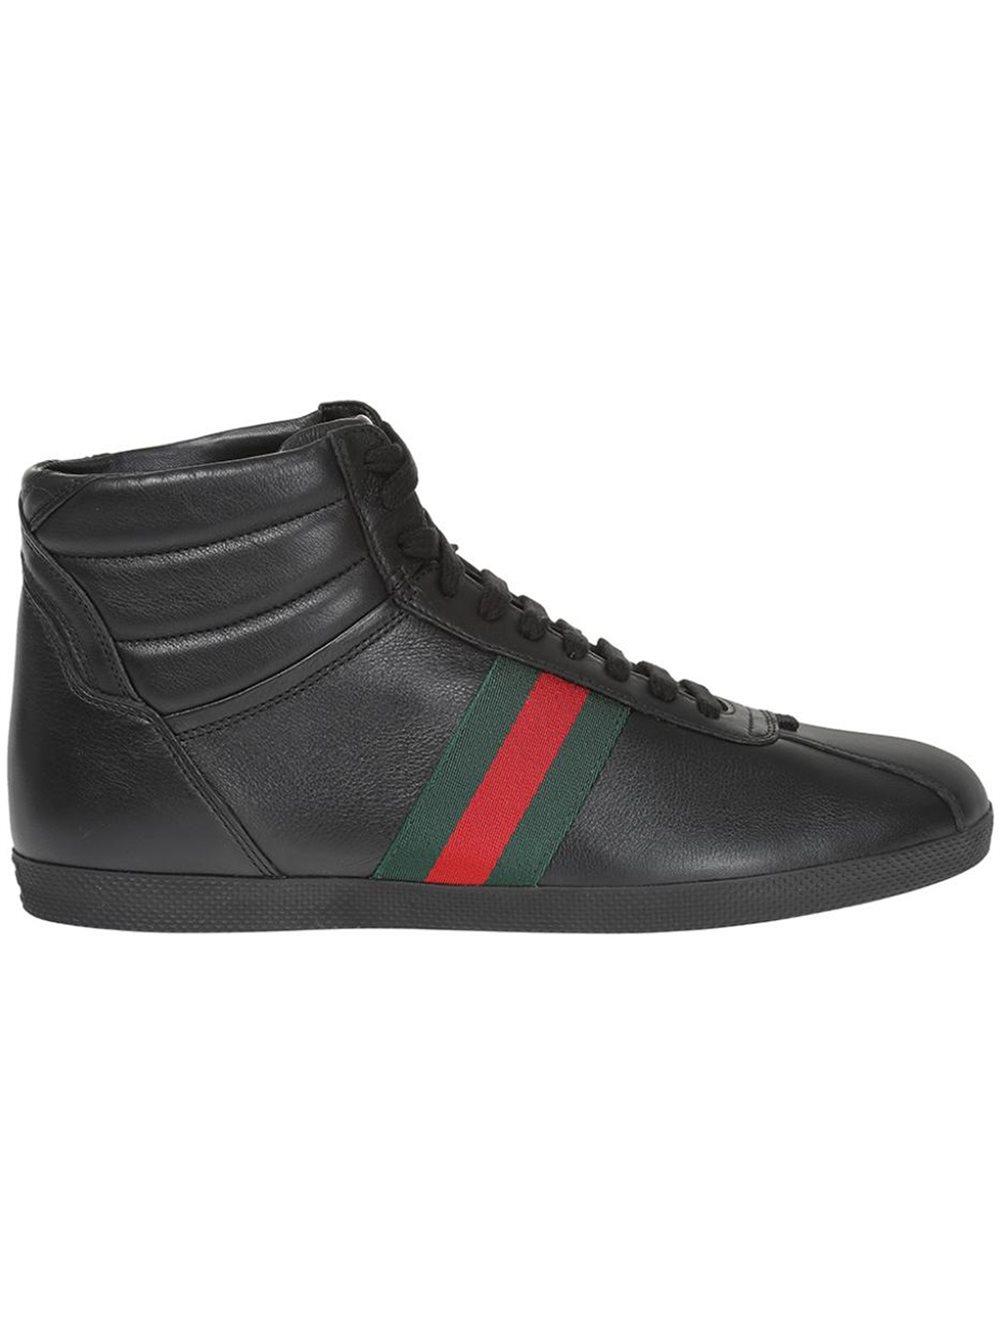 mens gucci high top trainers